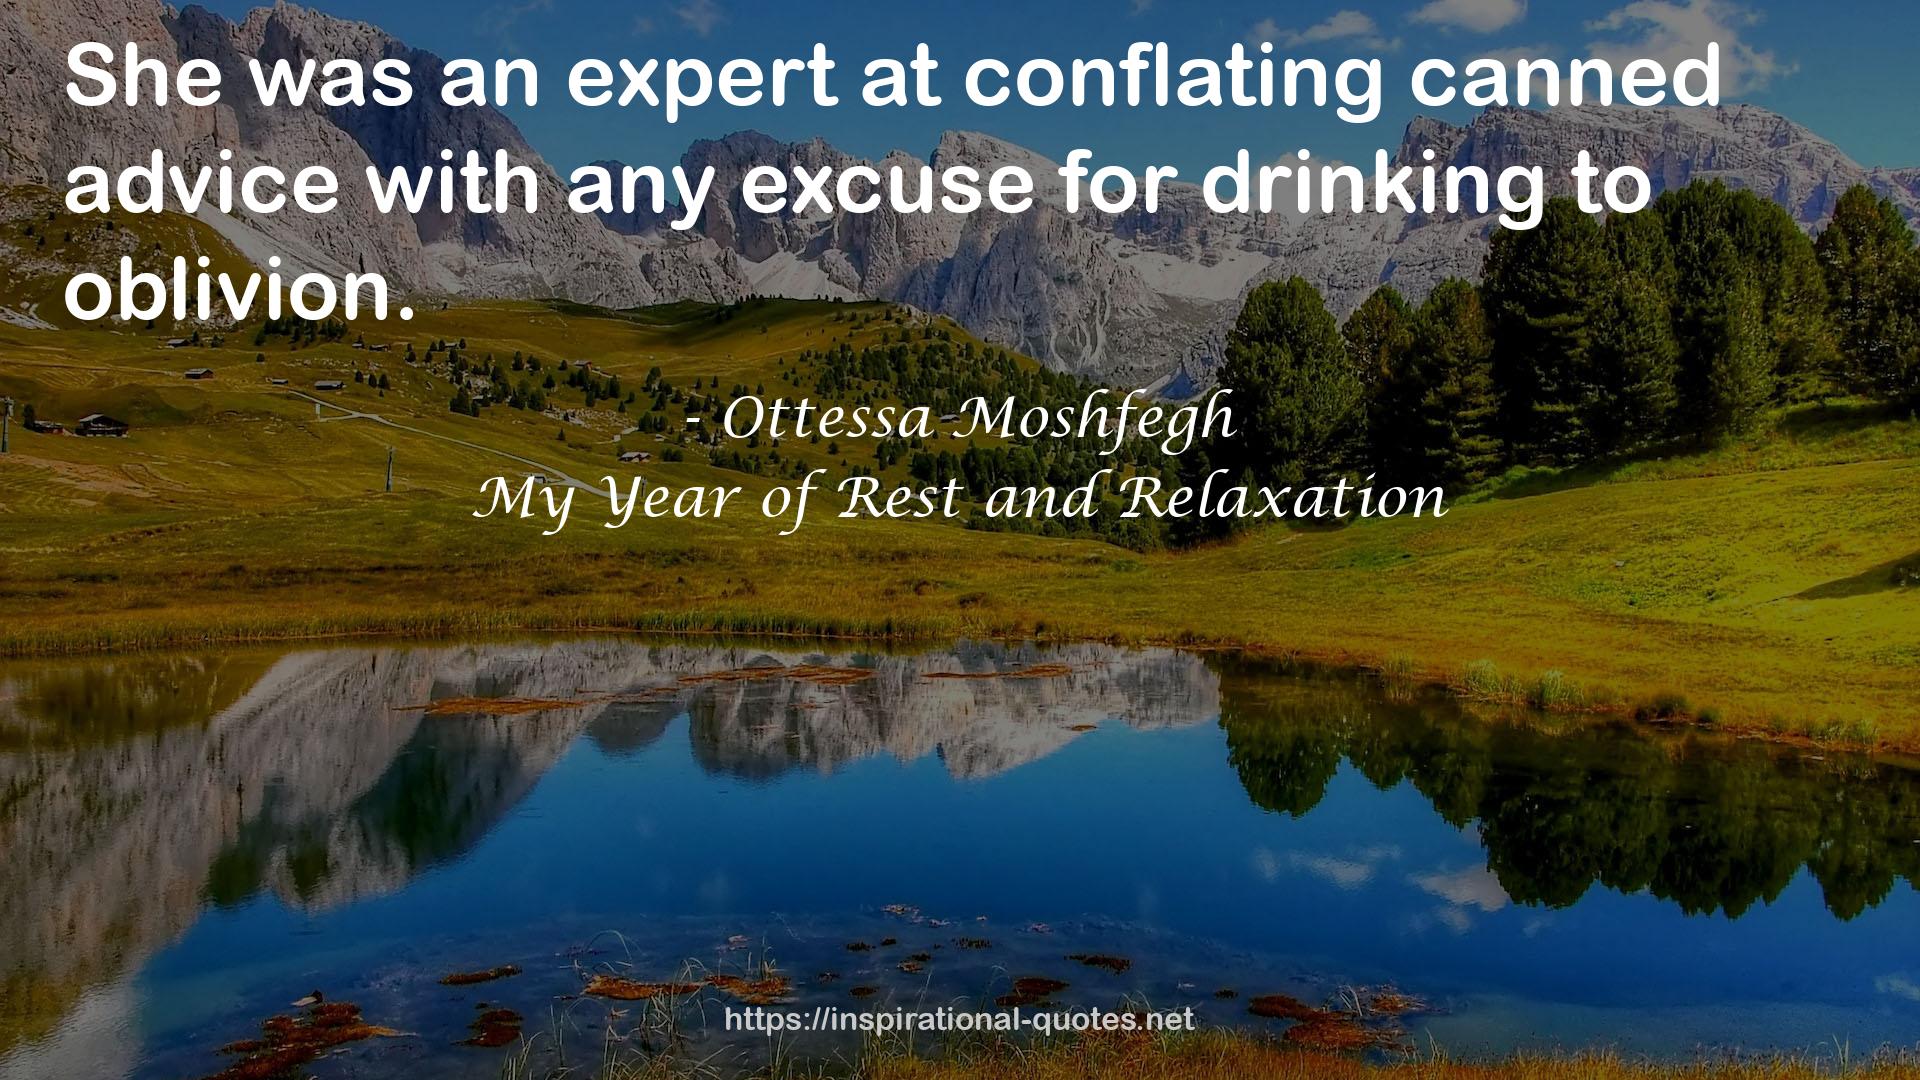 My Year of Rest and Relaxation QUOTES